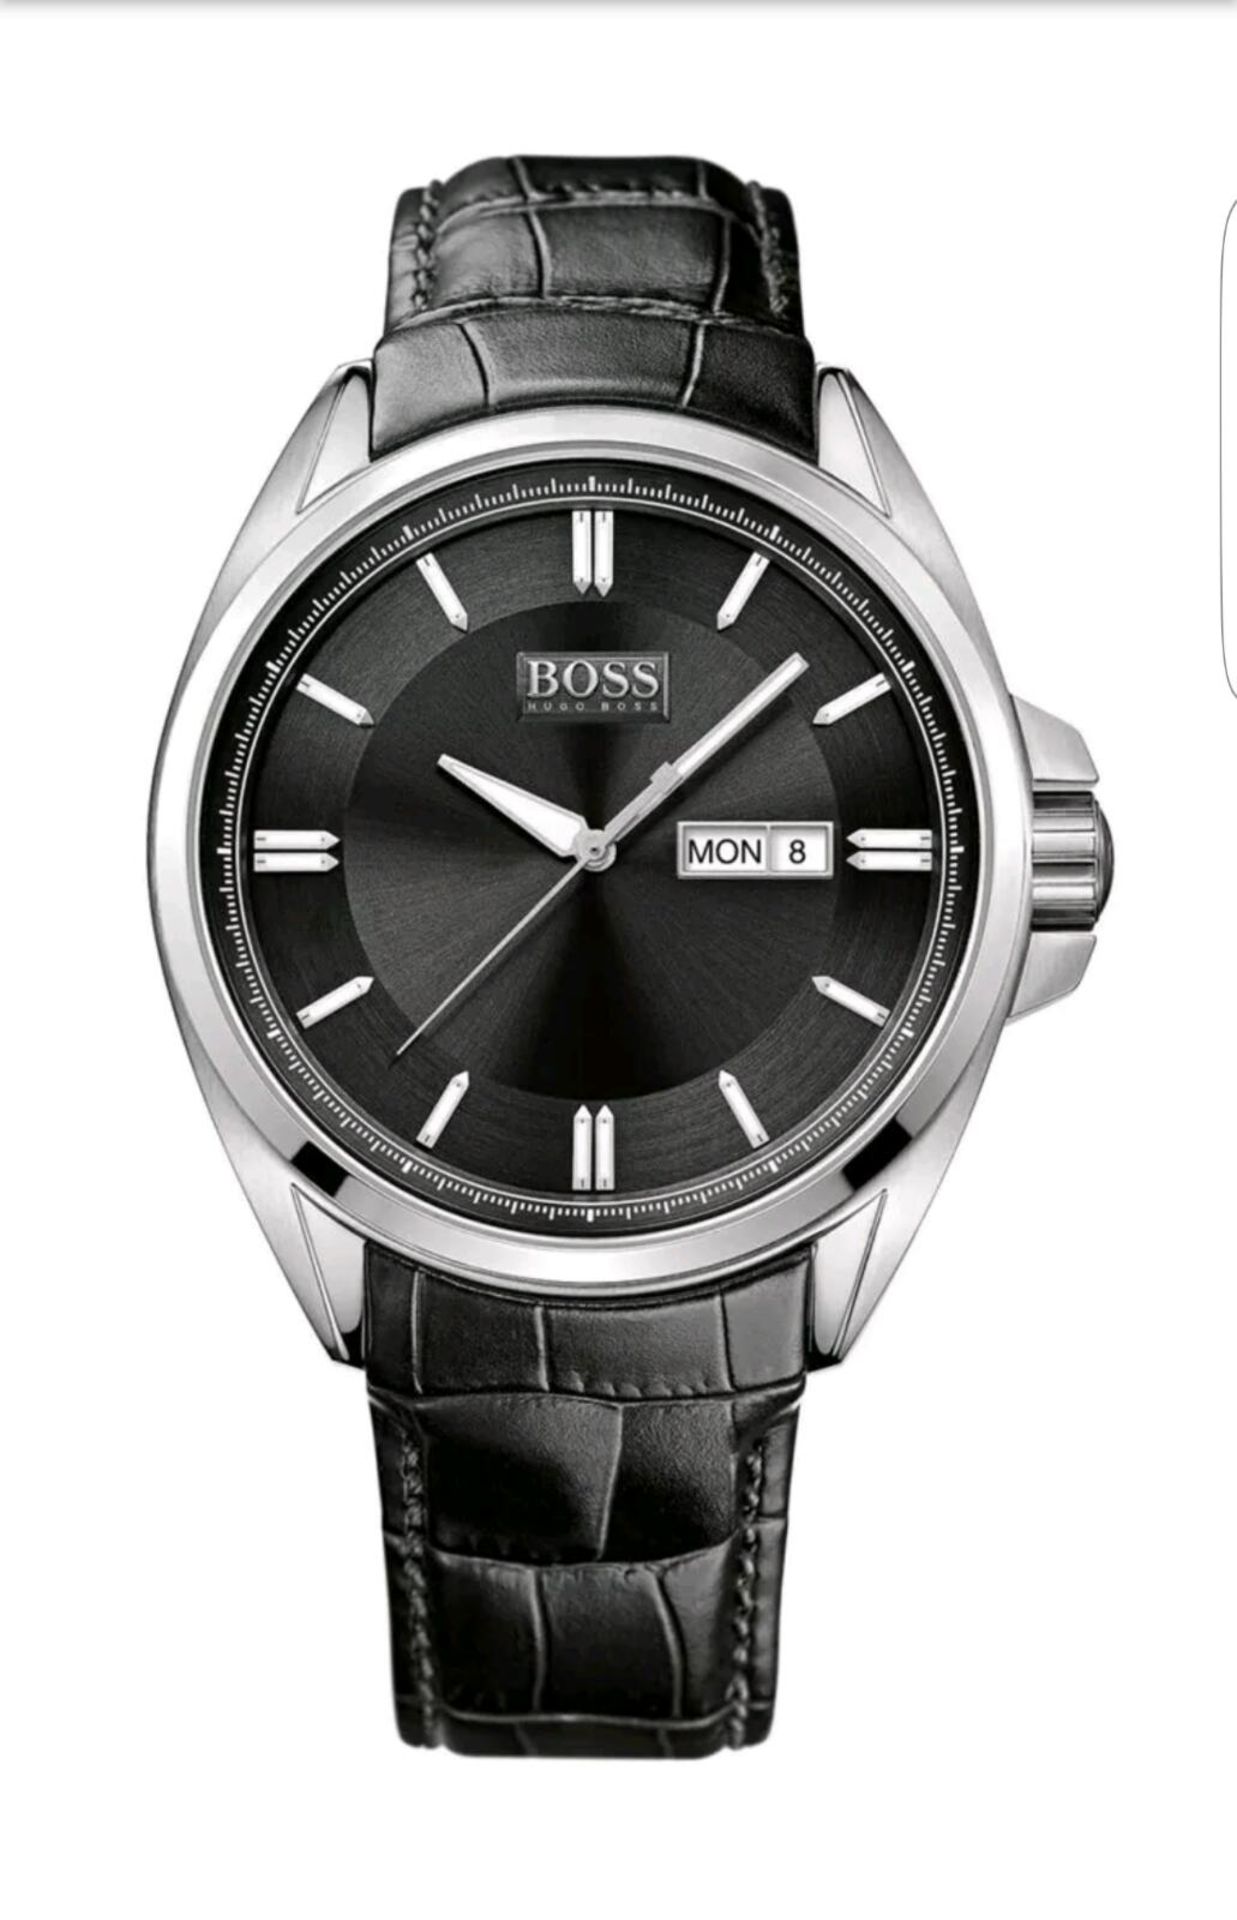 BRAND NEW HUGO BOSS 1512874, COMPLETE WITH ORIGINAL BOX AND MANUAL